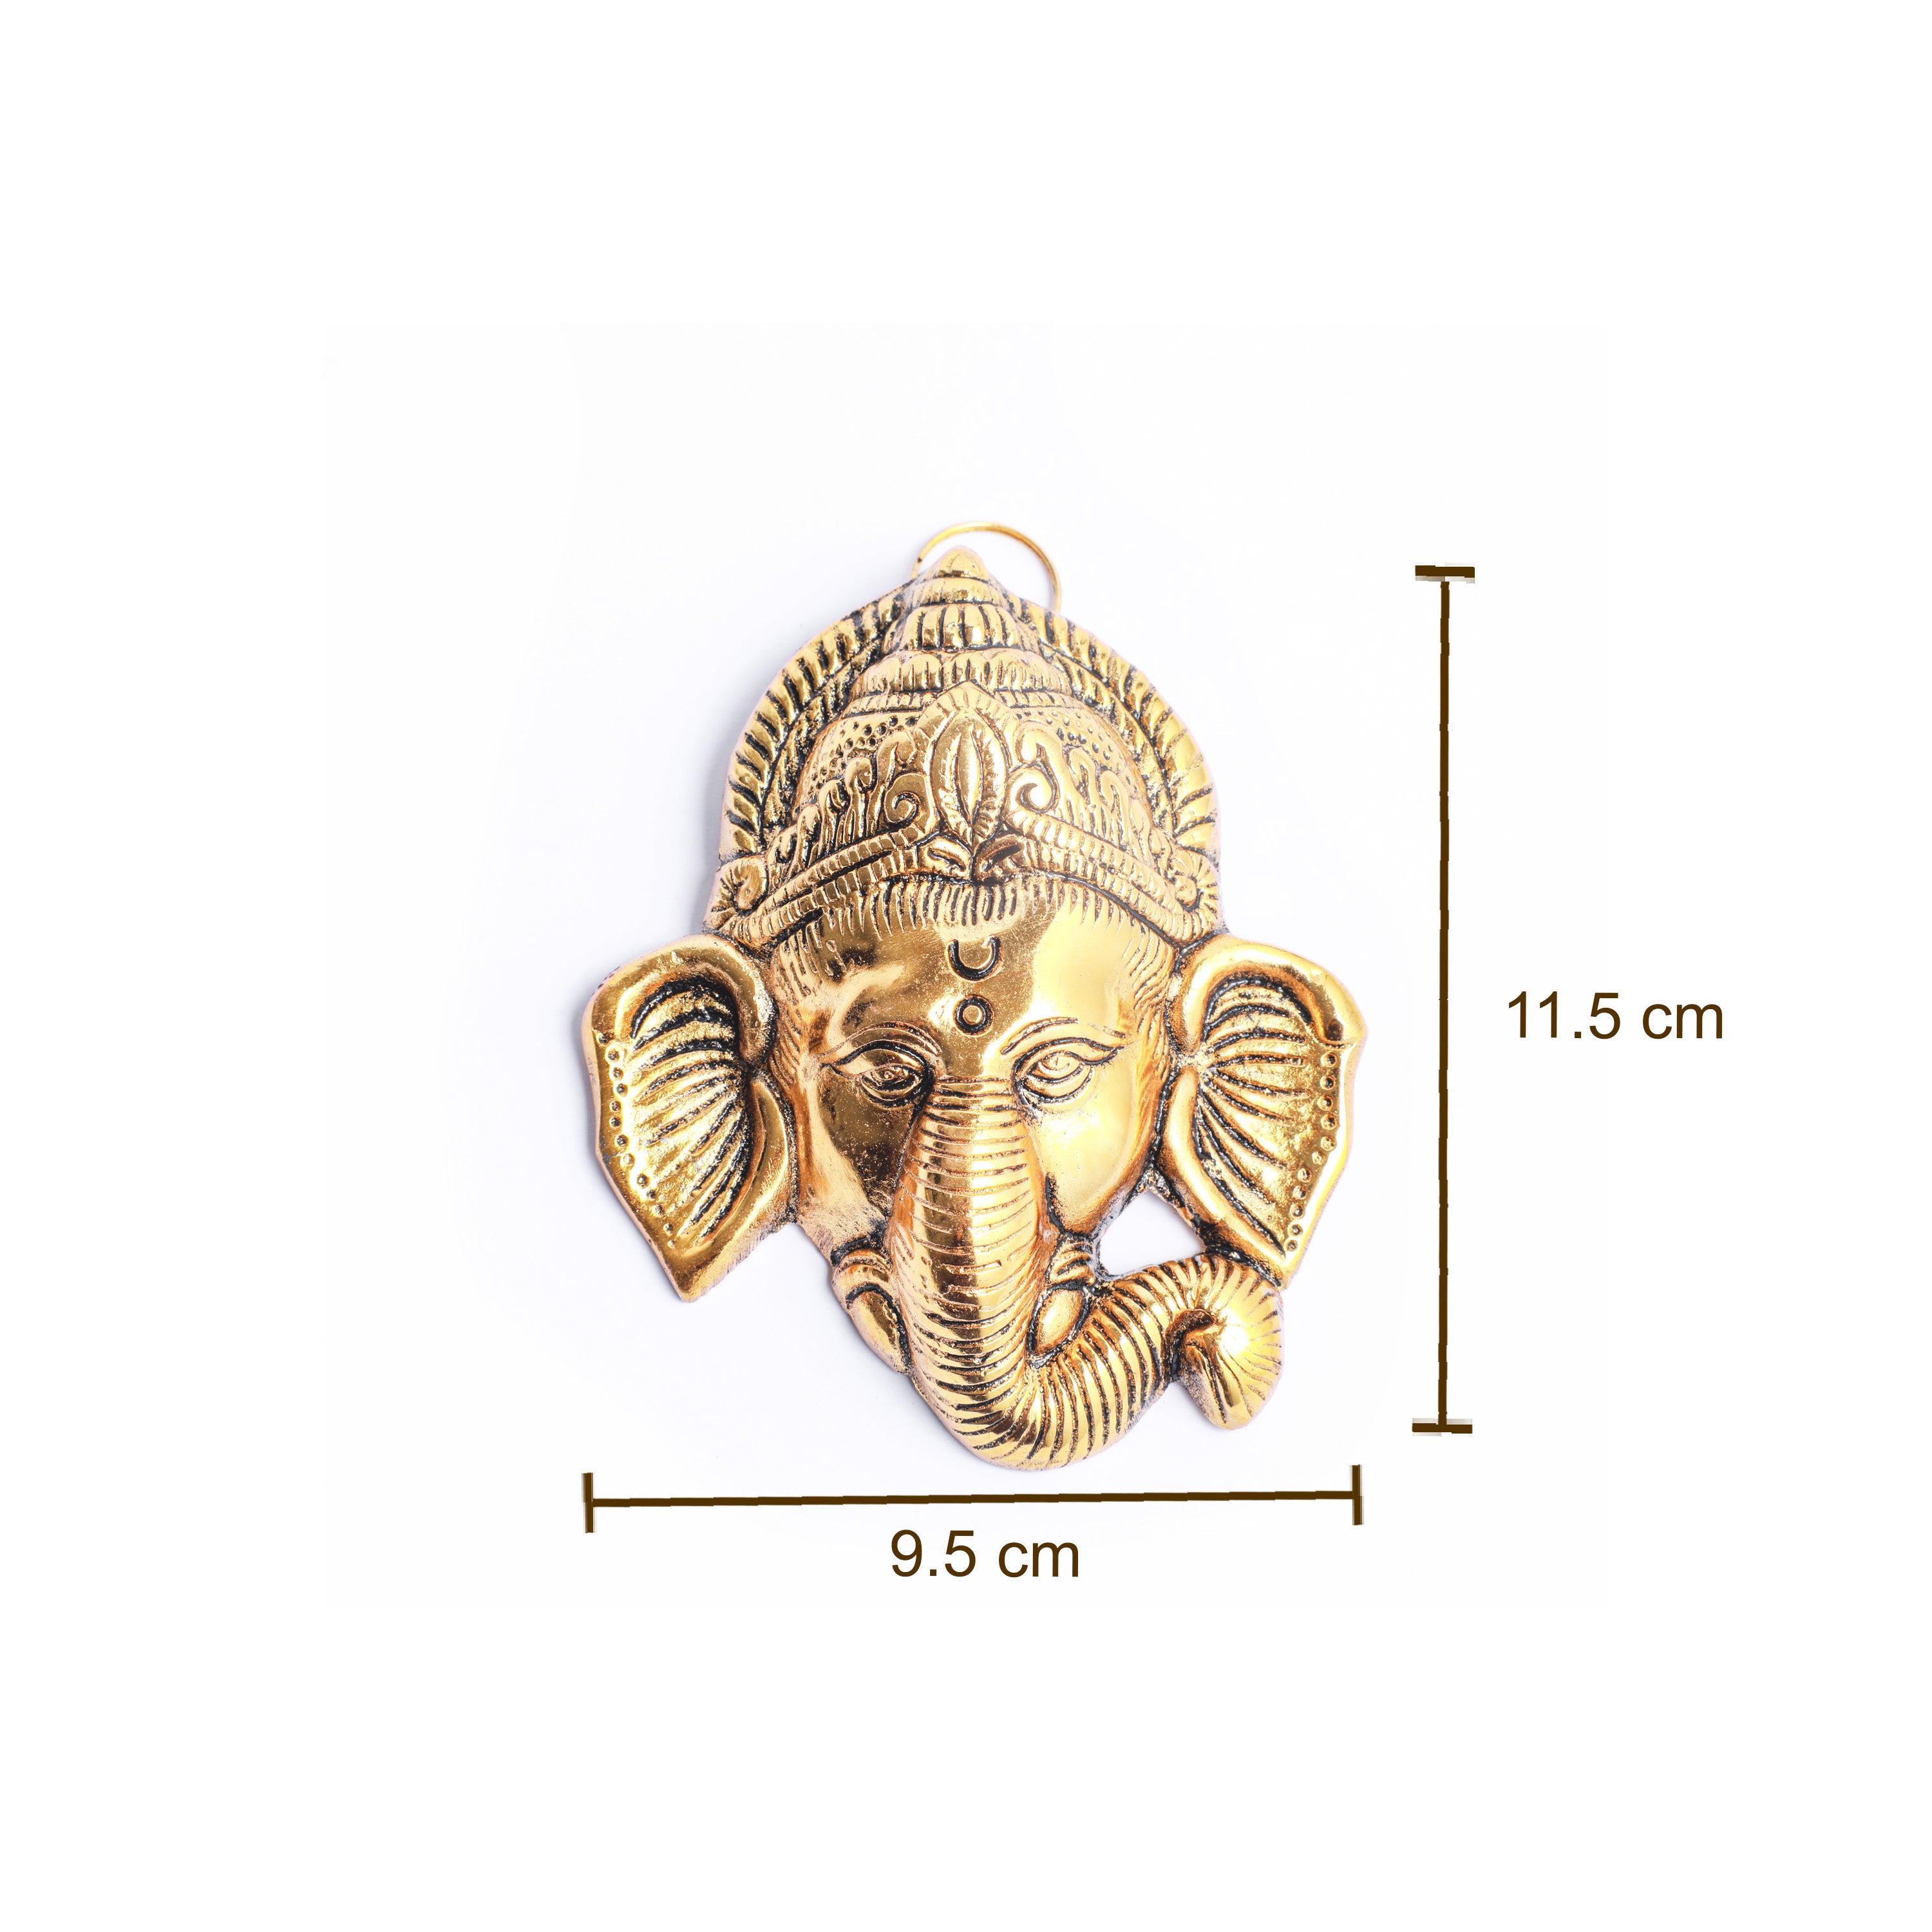 Lord Ganesh face hanging for gifting and decor in the USA